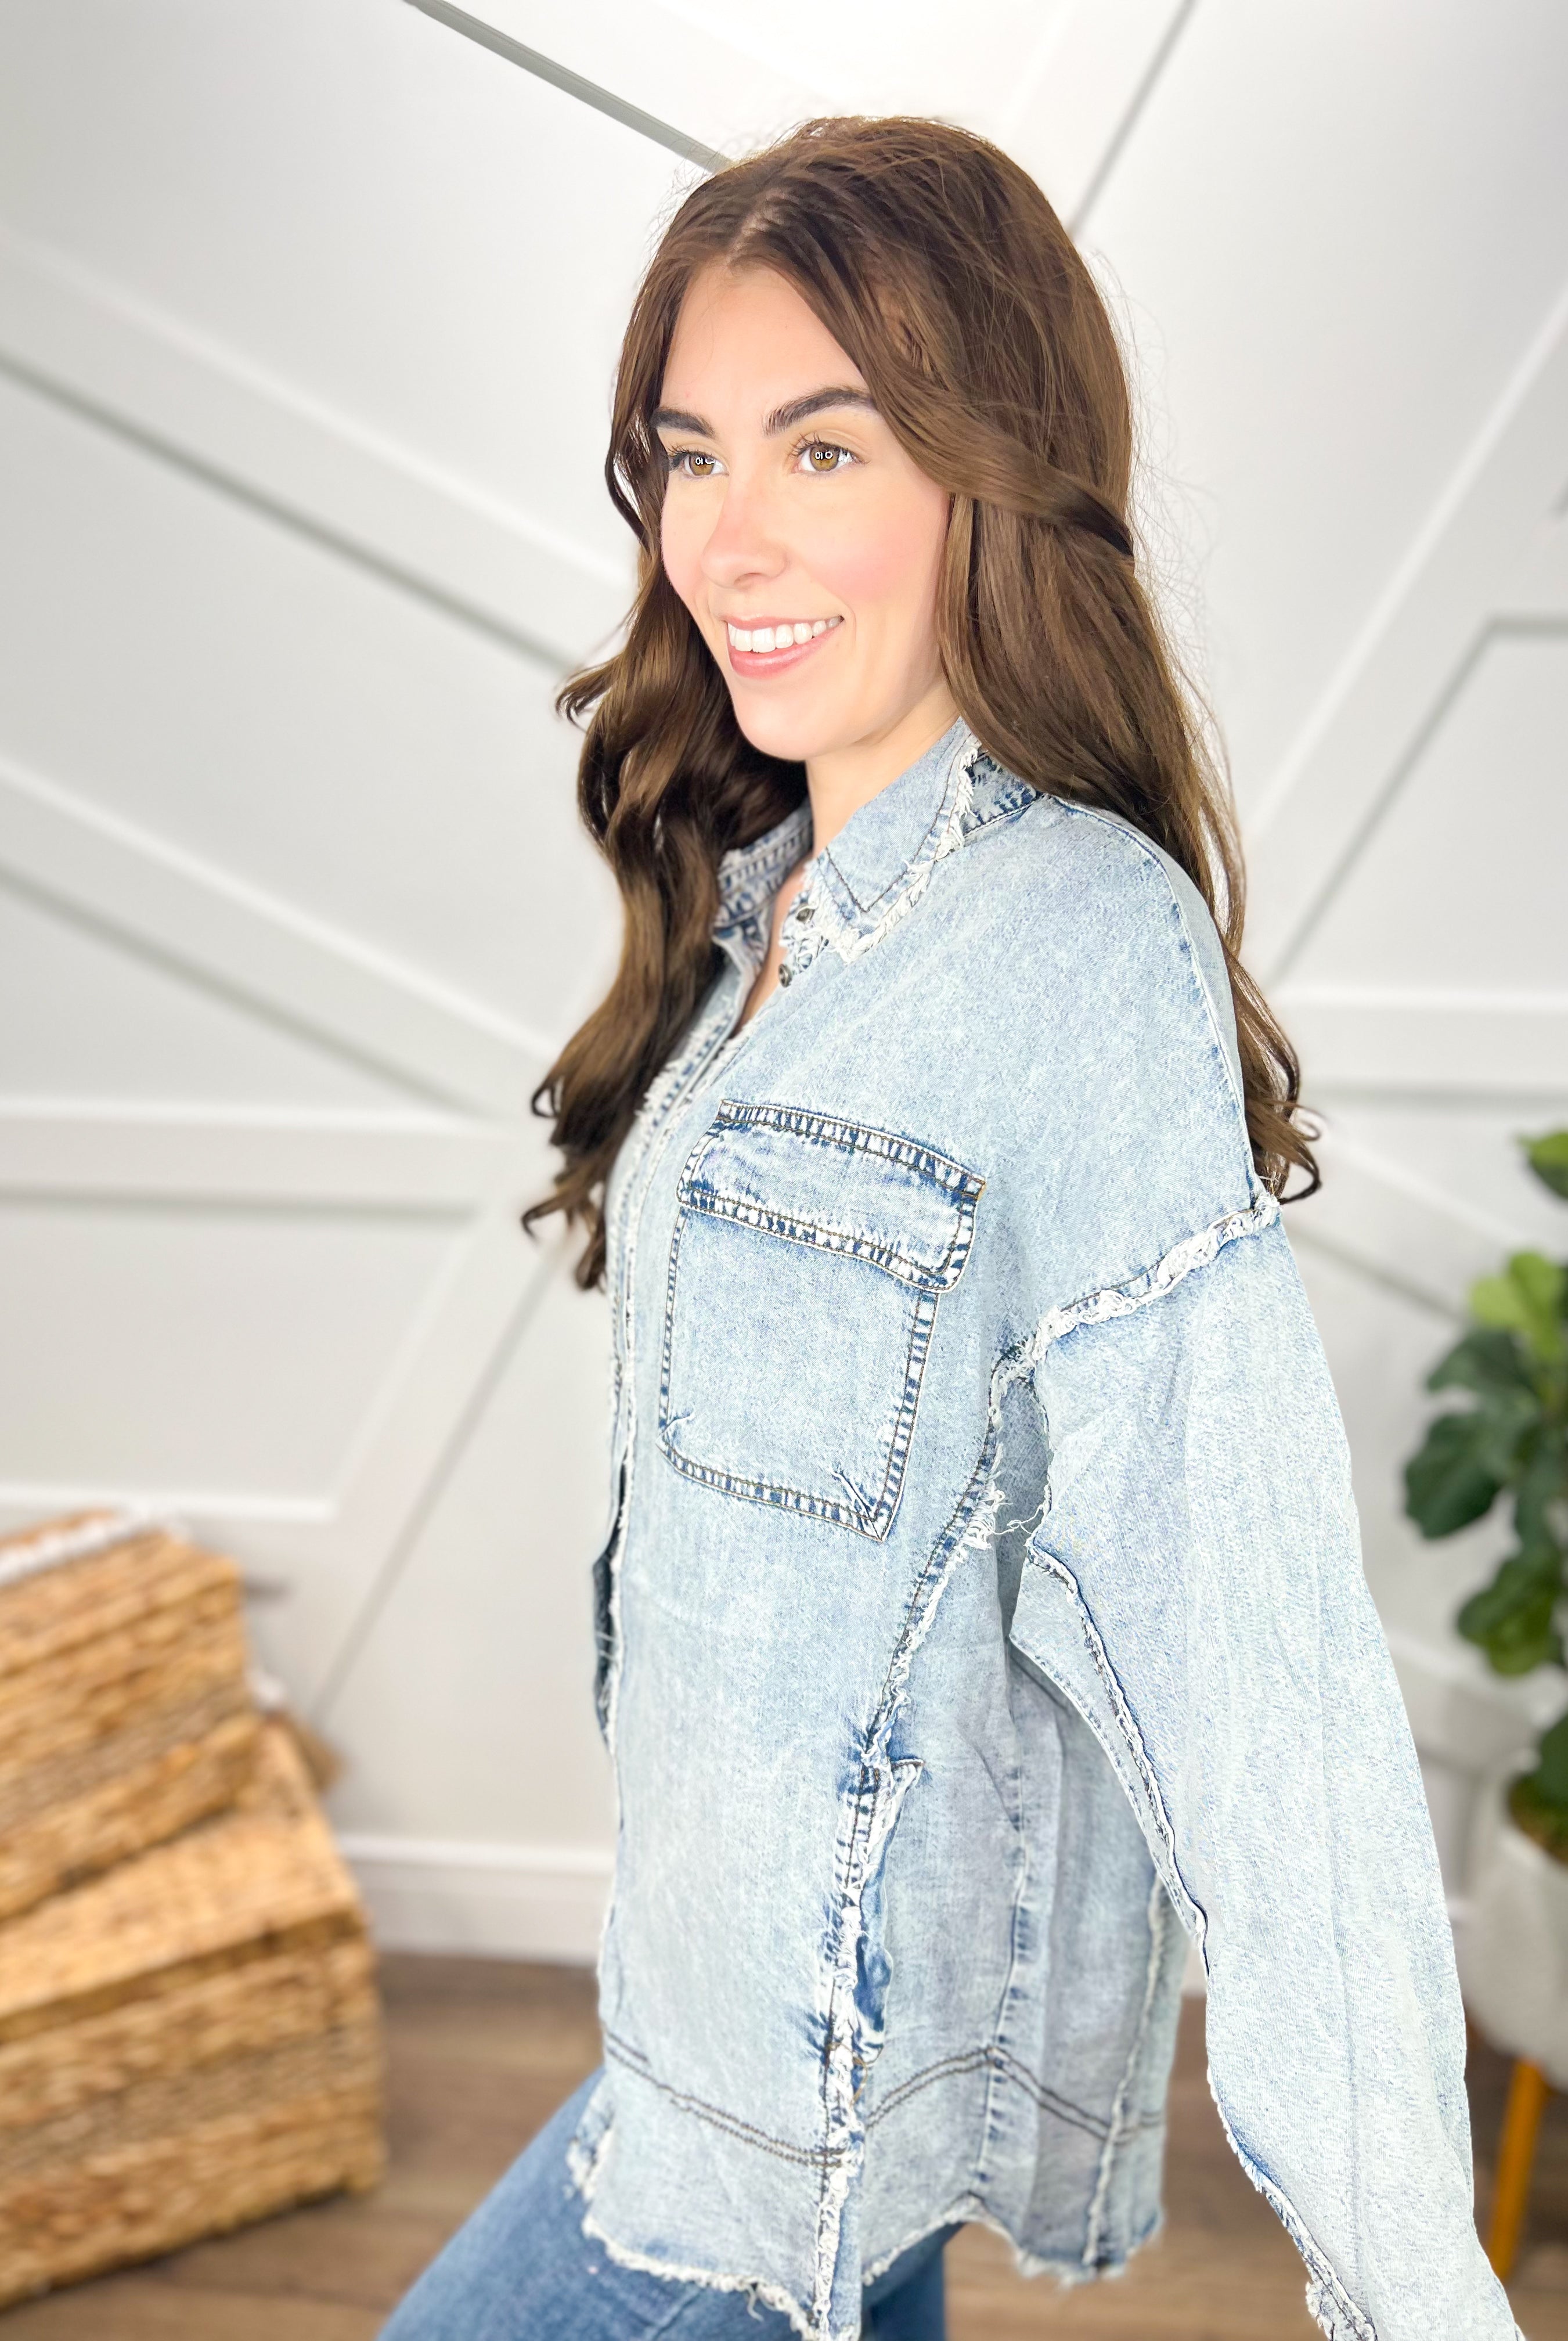 RESTOCK:Cool Factor Denim Top-120 Long Sleeve Tops-BlueVelvet-Heathered Boho Boutique, Women's Fashion and Accessories in Palmetto, FL